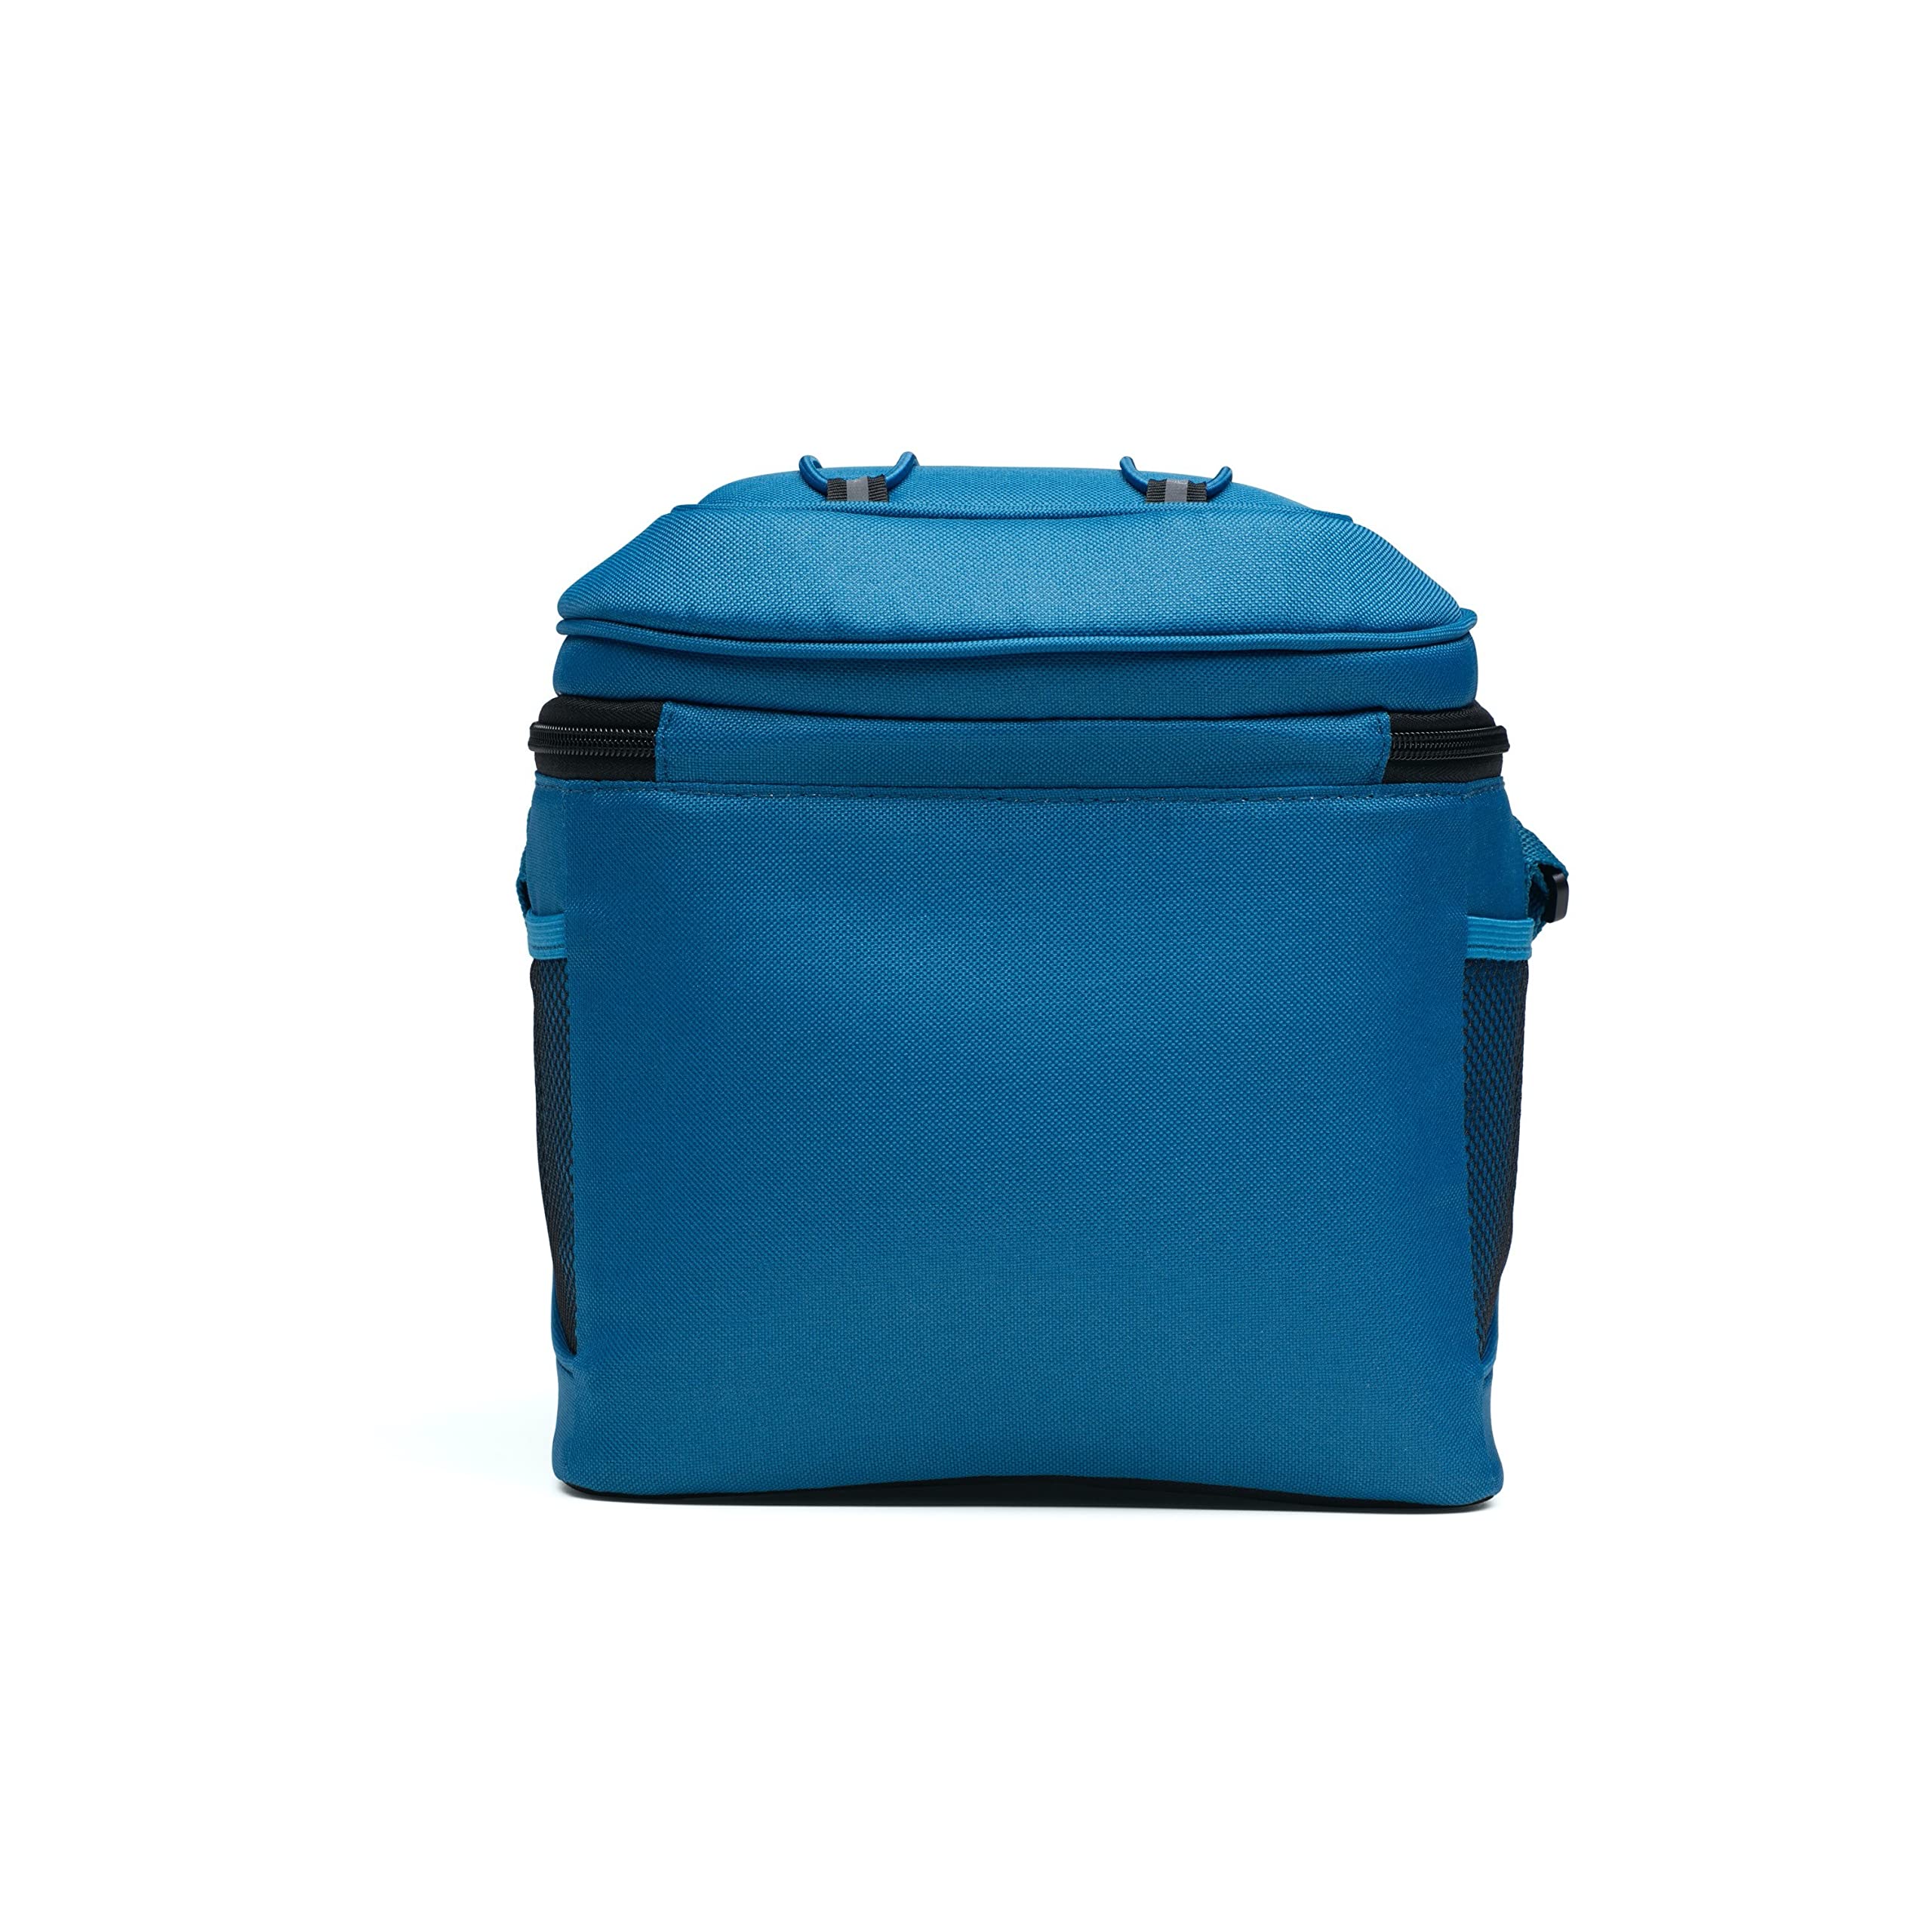 Coleman Chiller Series Insulated Portable Soft Cooler, Leak-Proof 9 Can Capacity Lunch Cooler with Ice Retention